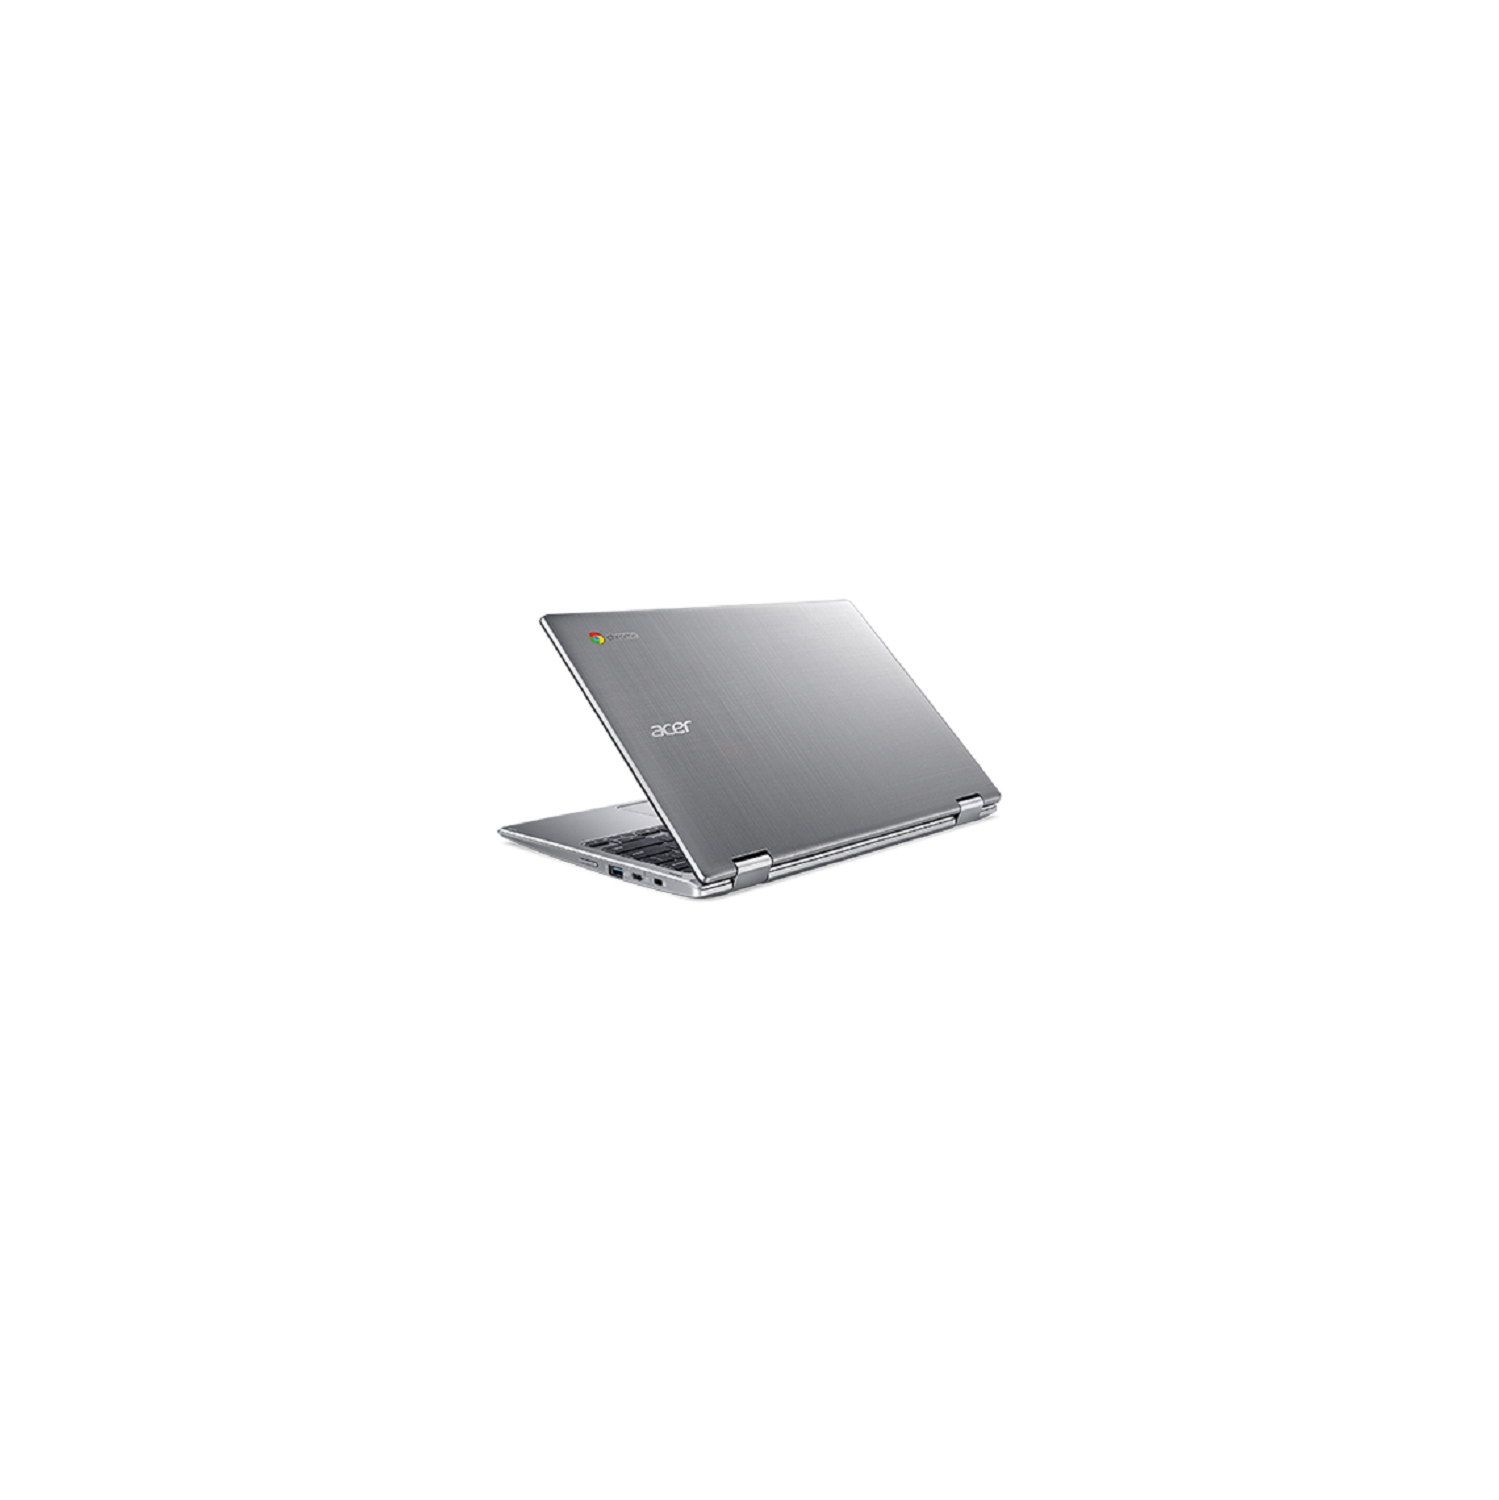 Refurbished (Good) - Acer CP311-1H-C3FP Chromebook Spin 11 11.6" HD Touchscreen Celeron N3350 1.10GHz Intel HD Graphics 500 4GB RAM 32GB SSD Sparkly Silver Chrome OS